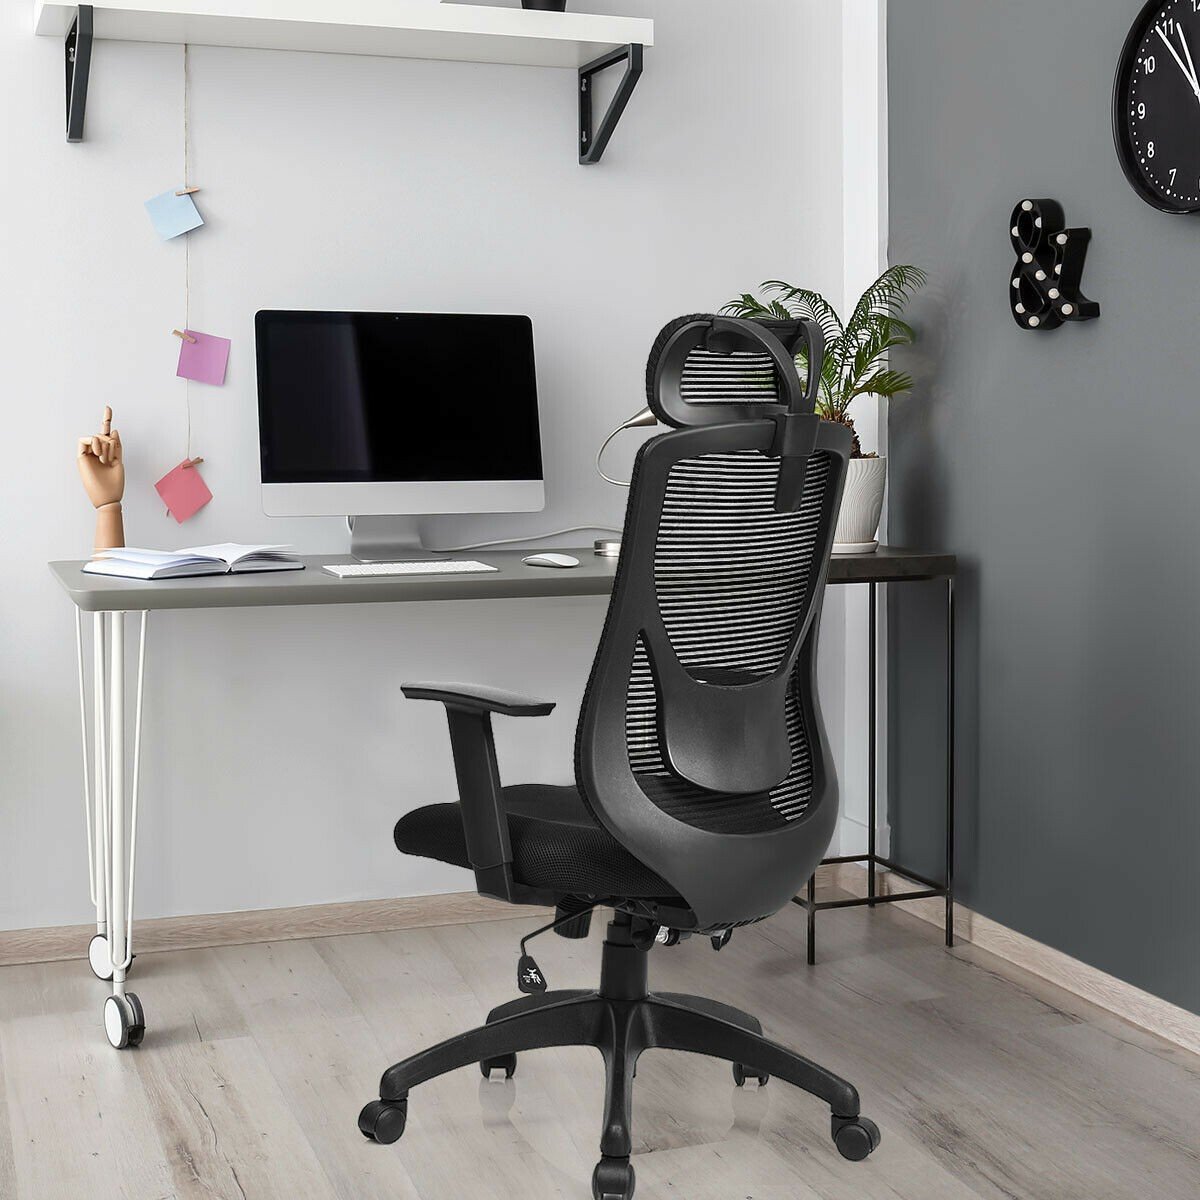 Gaming Chair - Recliner Adjustable Mesh Office Chair